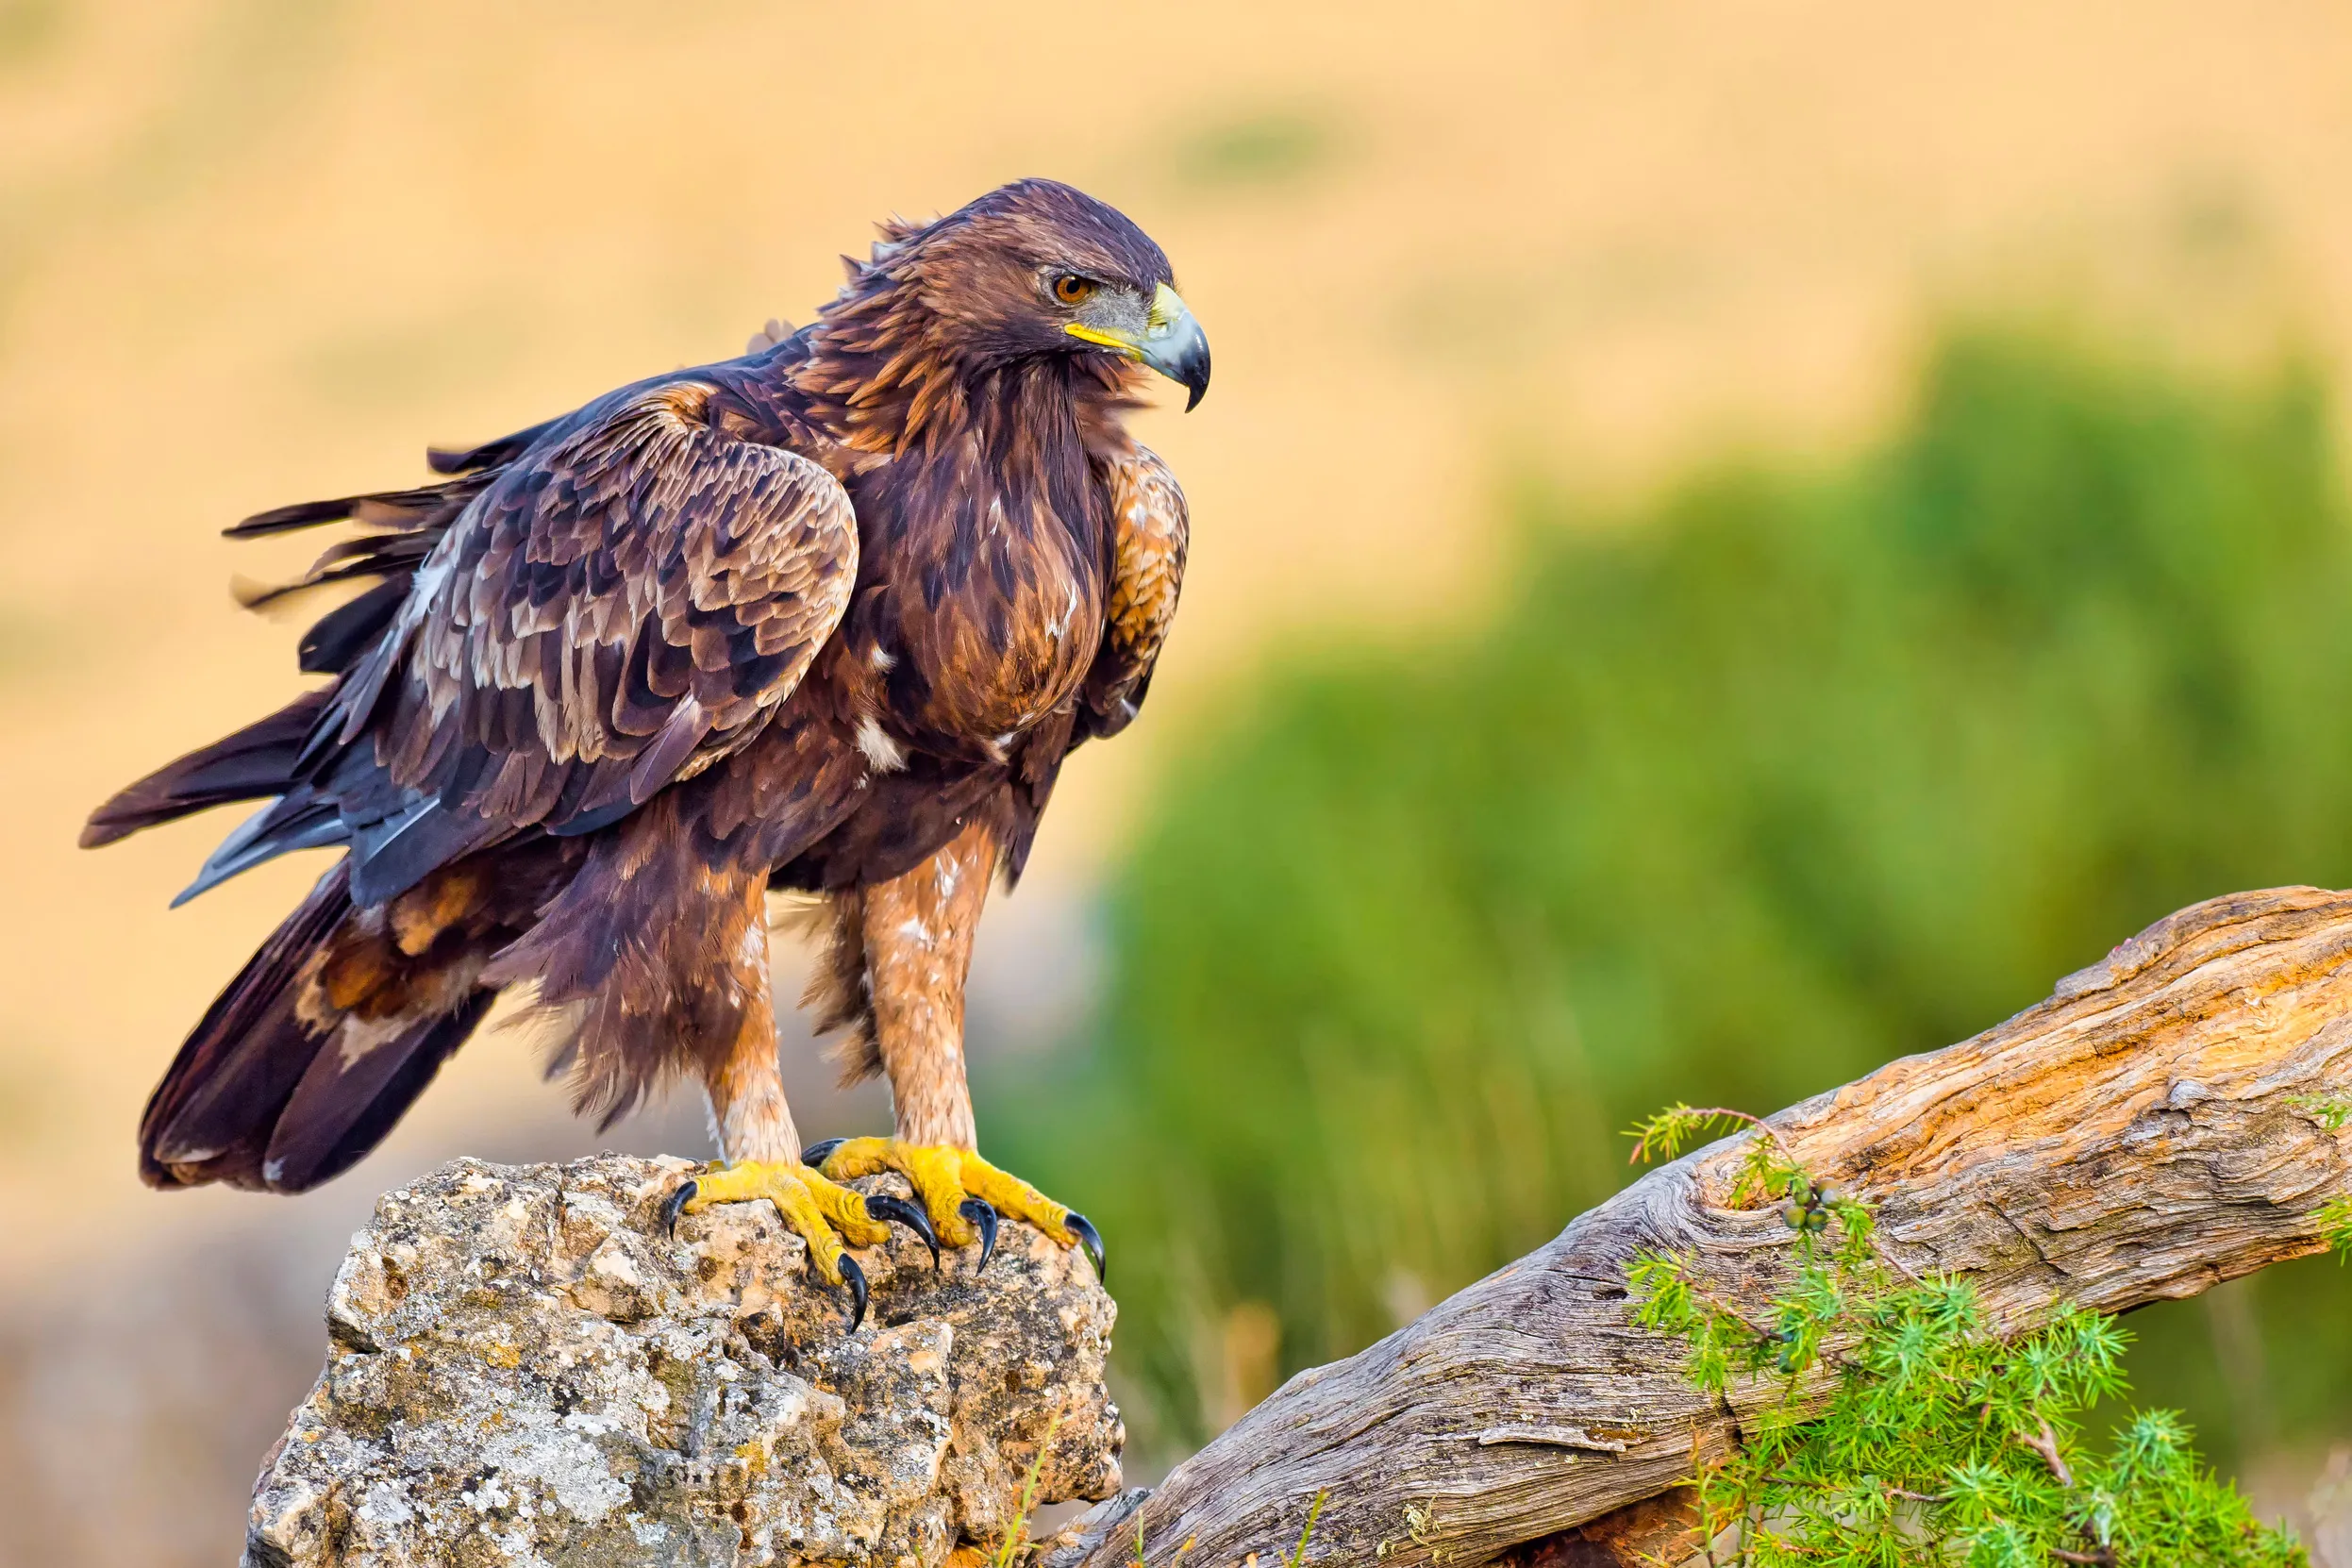 A lone Golden Eagle perched on a rock.